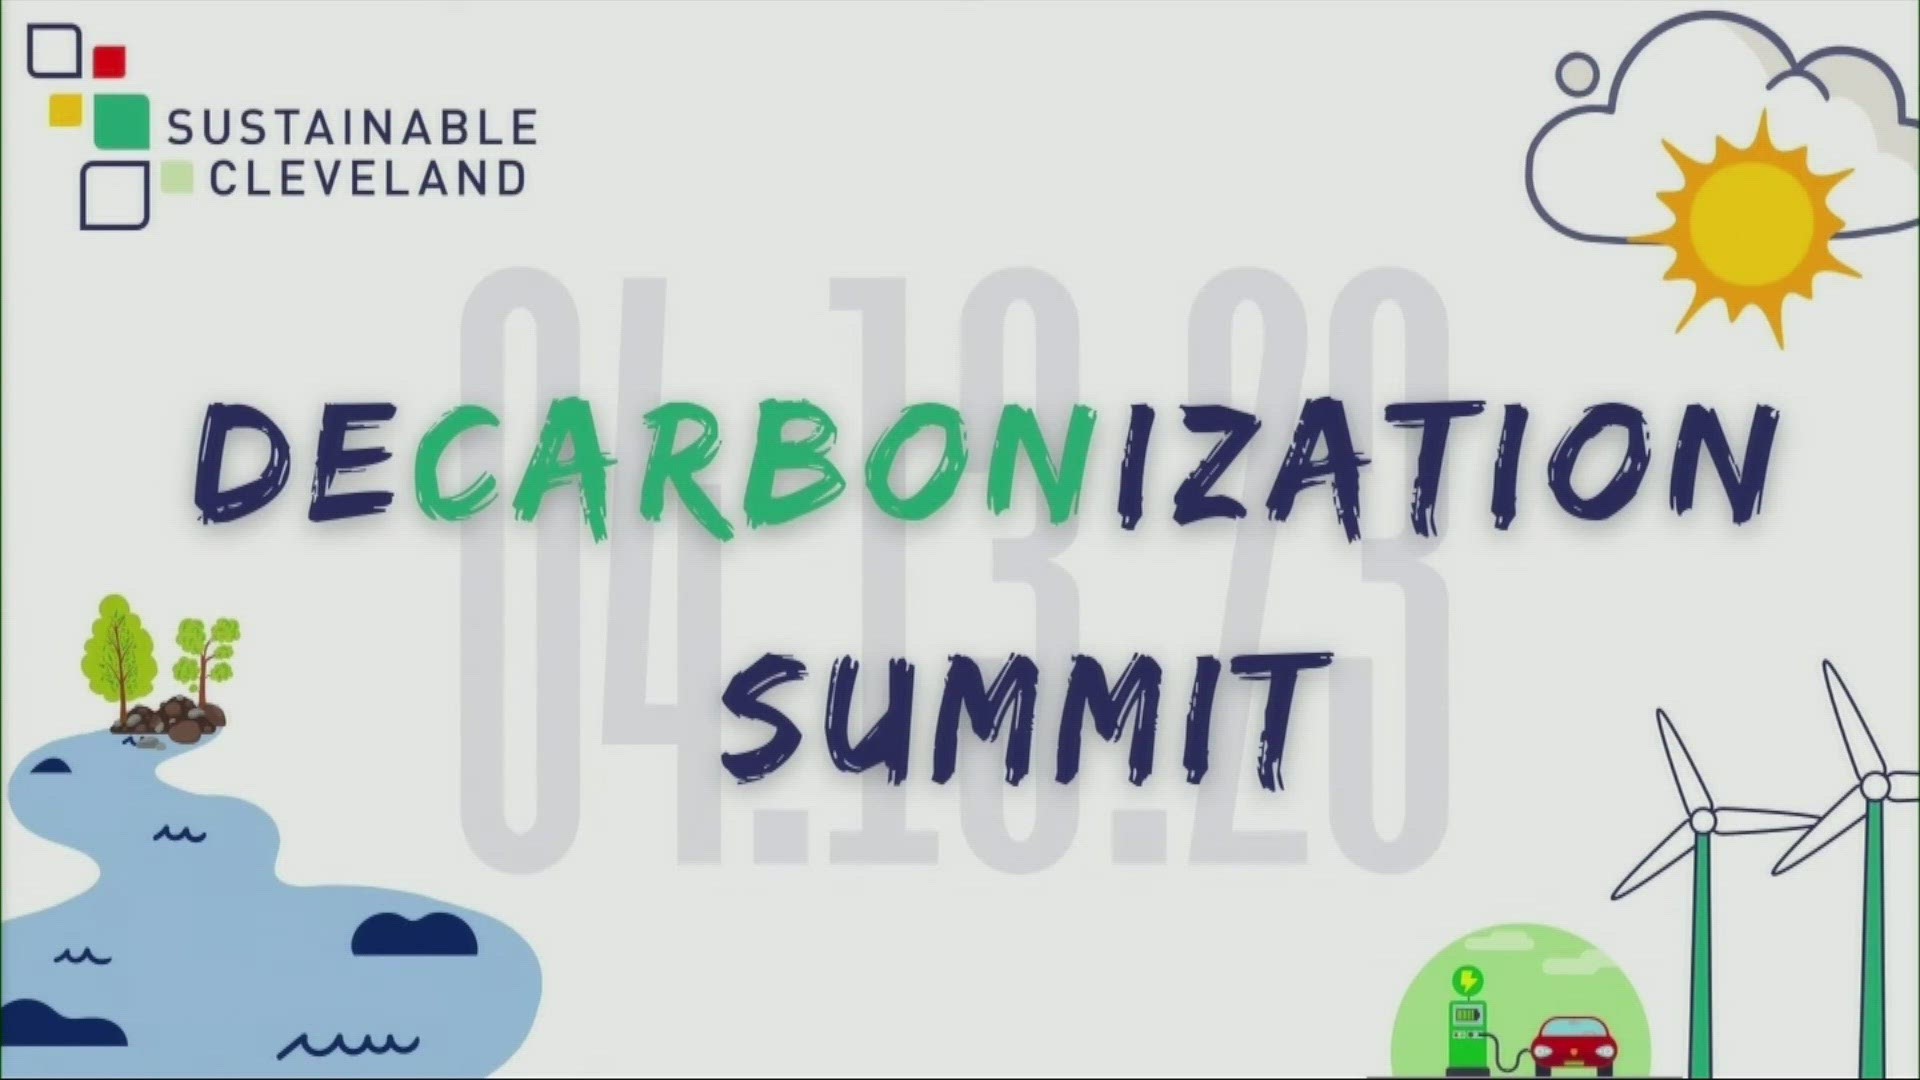 The summit discussed ways Cleveland can better combat climate change.